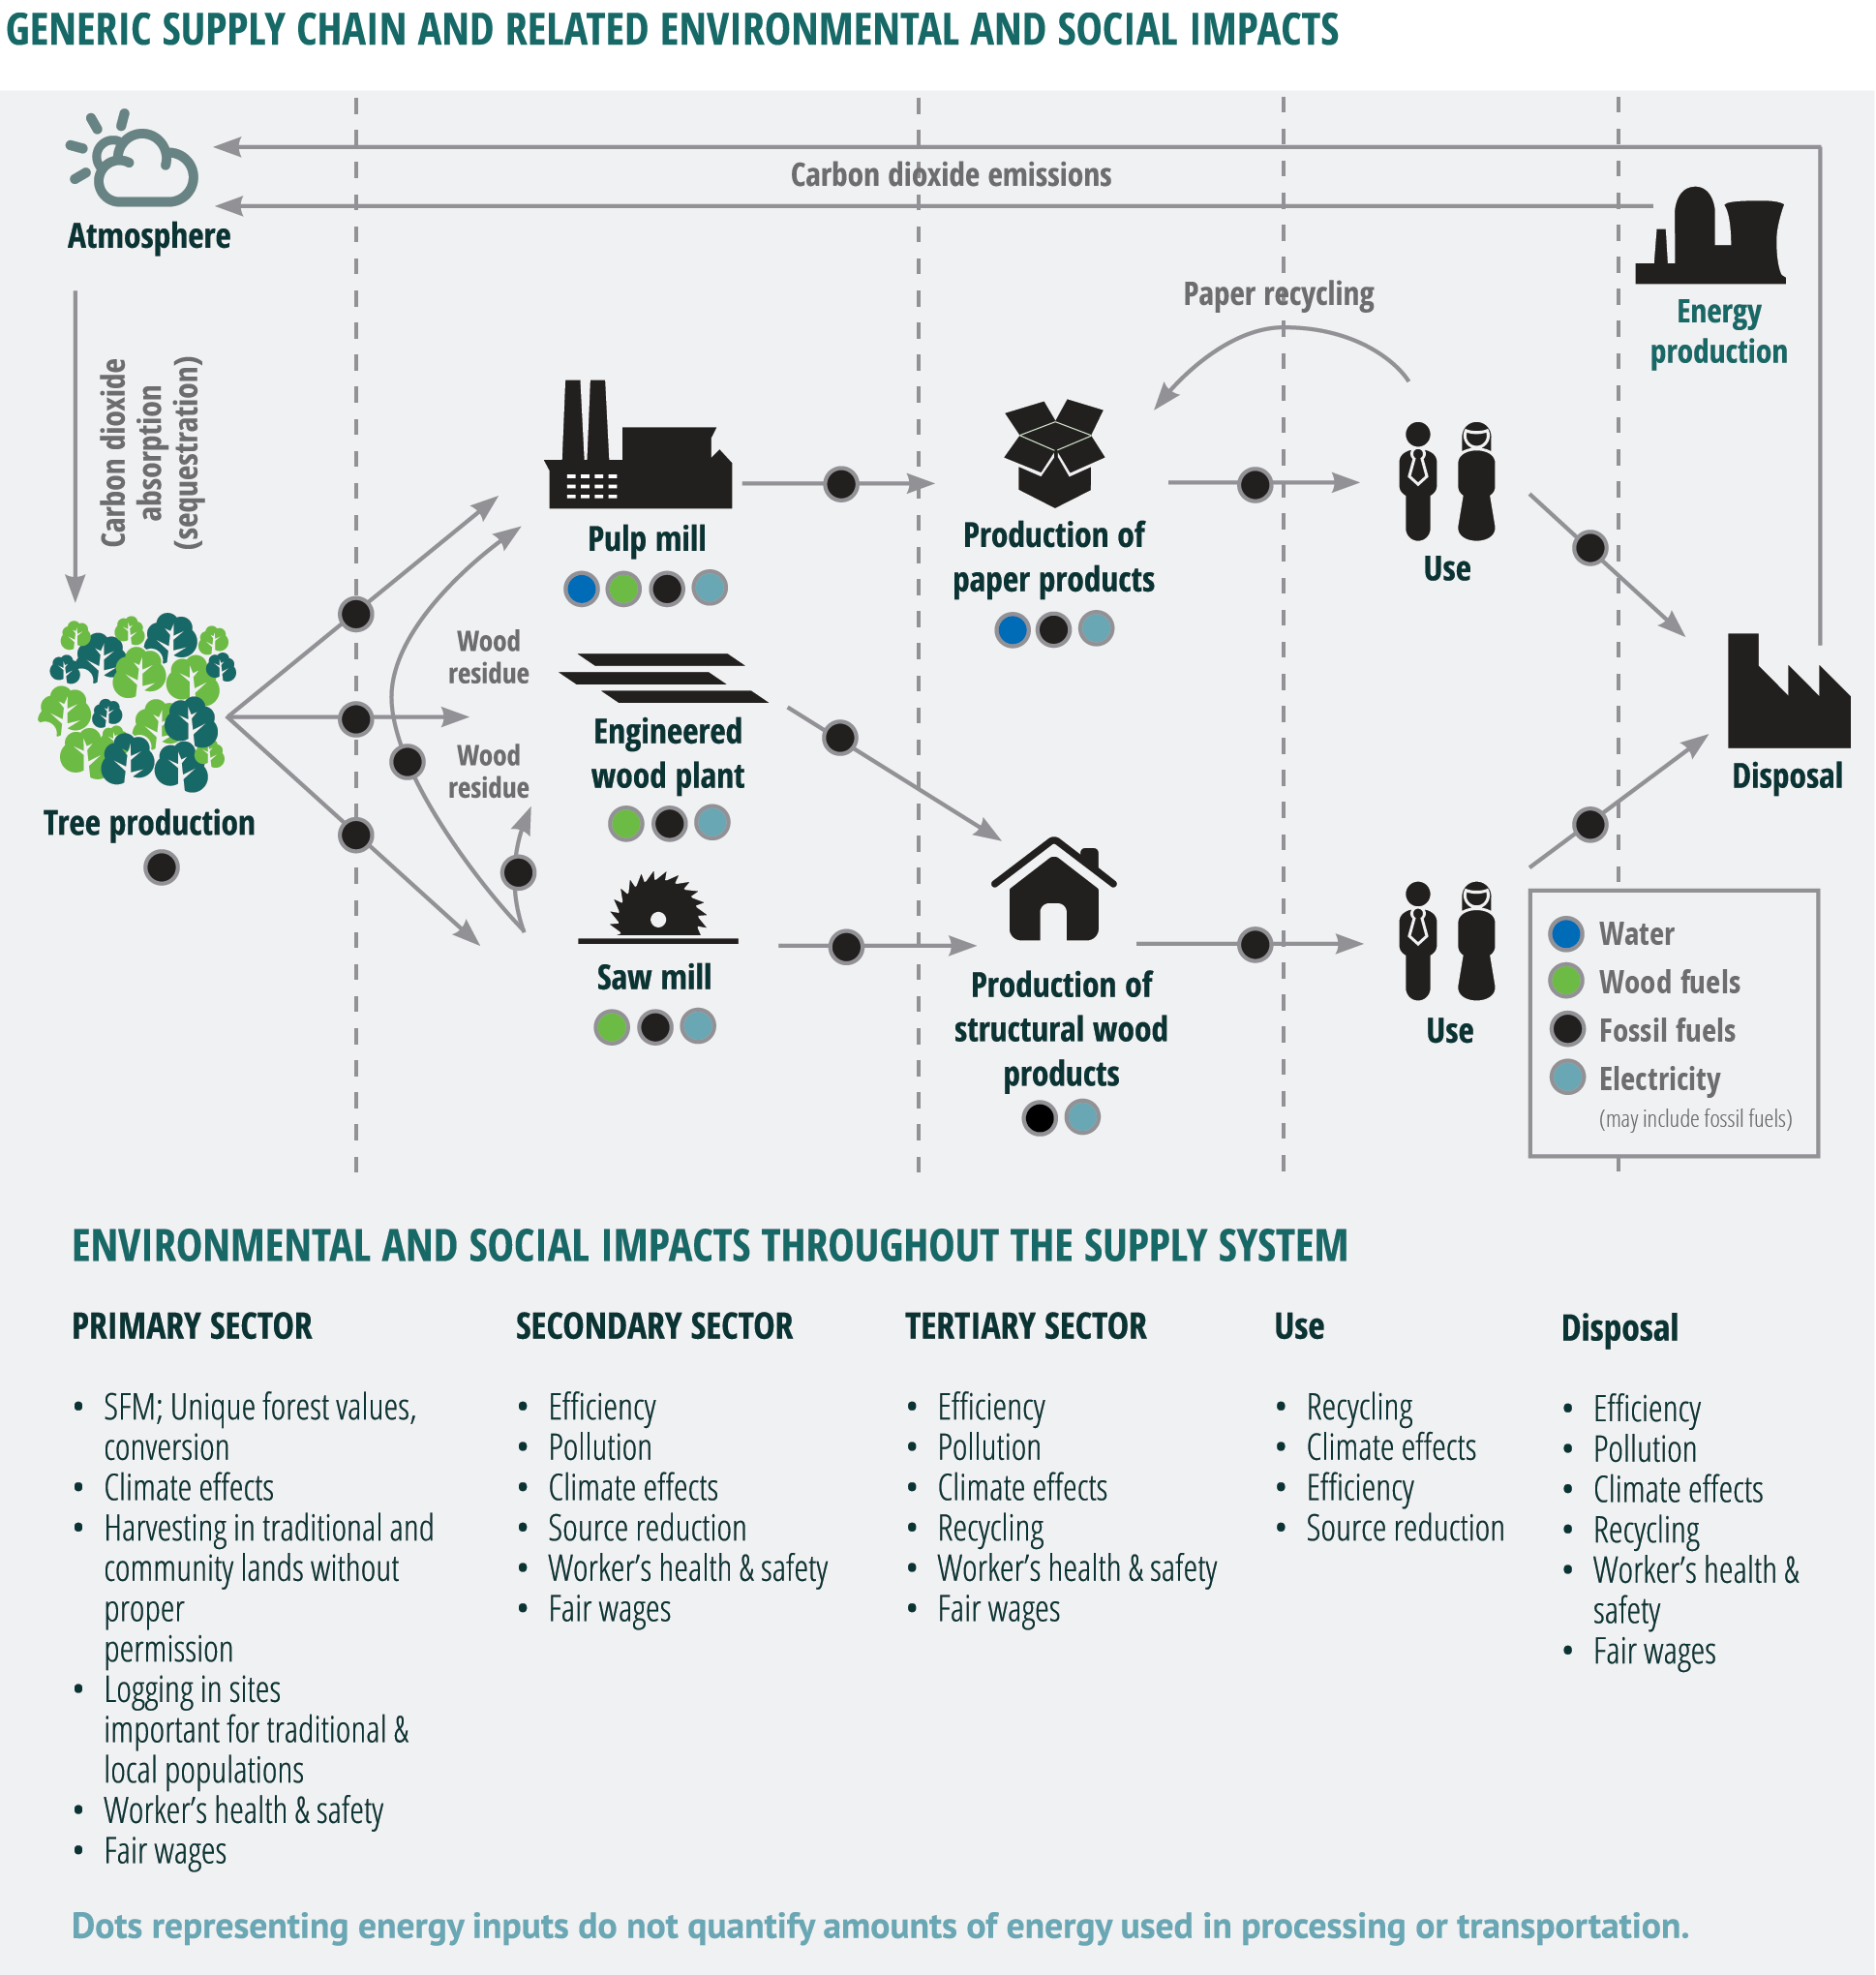 generic supply chain and related environmental and social impacts infographic